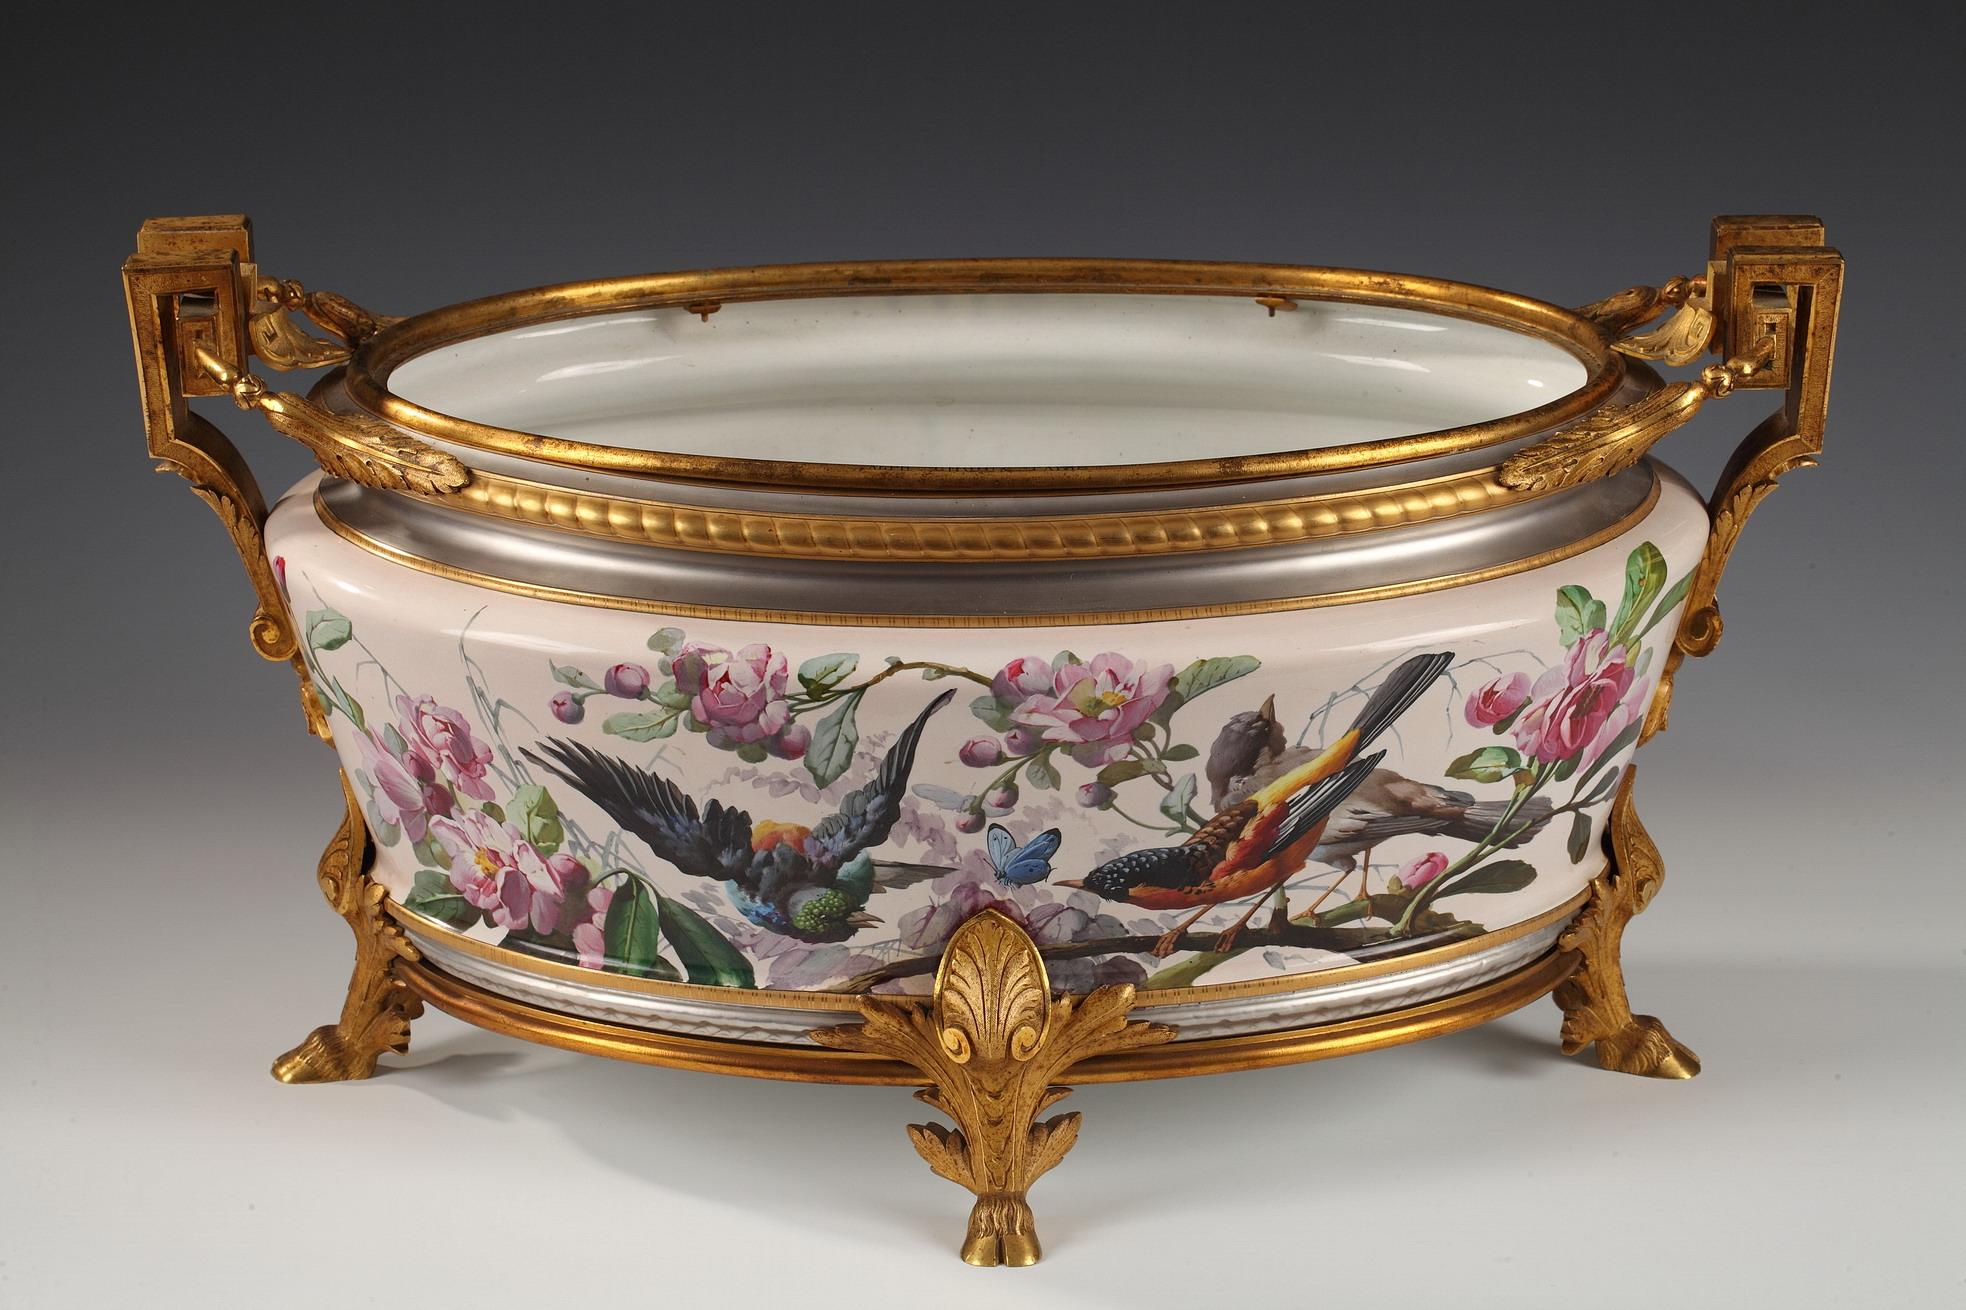 Signed ALPH. GIROUX PARIS on the bronze mount ; 
Marked L.M. & Cie and MONTEREAU under the earthenware. 

Planter painted with peonies, birds and butterflies, gilded and platinium filets, inserted in gilt bronze mounts on four foliate and hooves